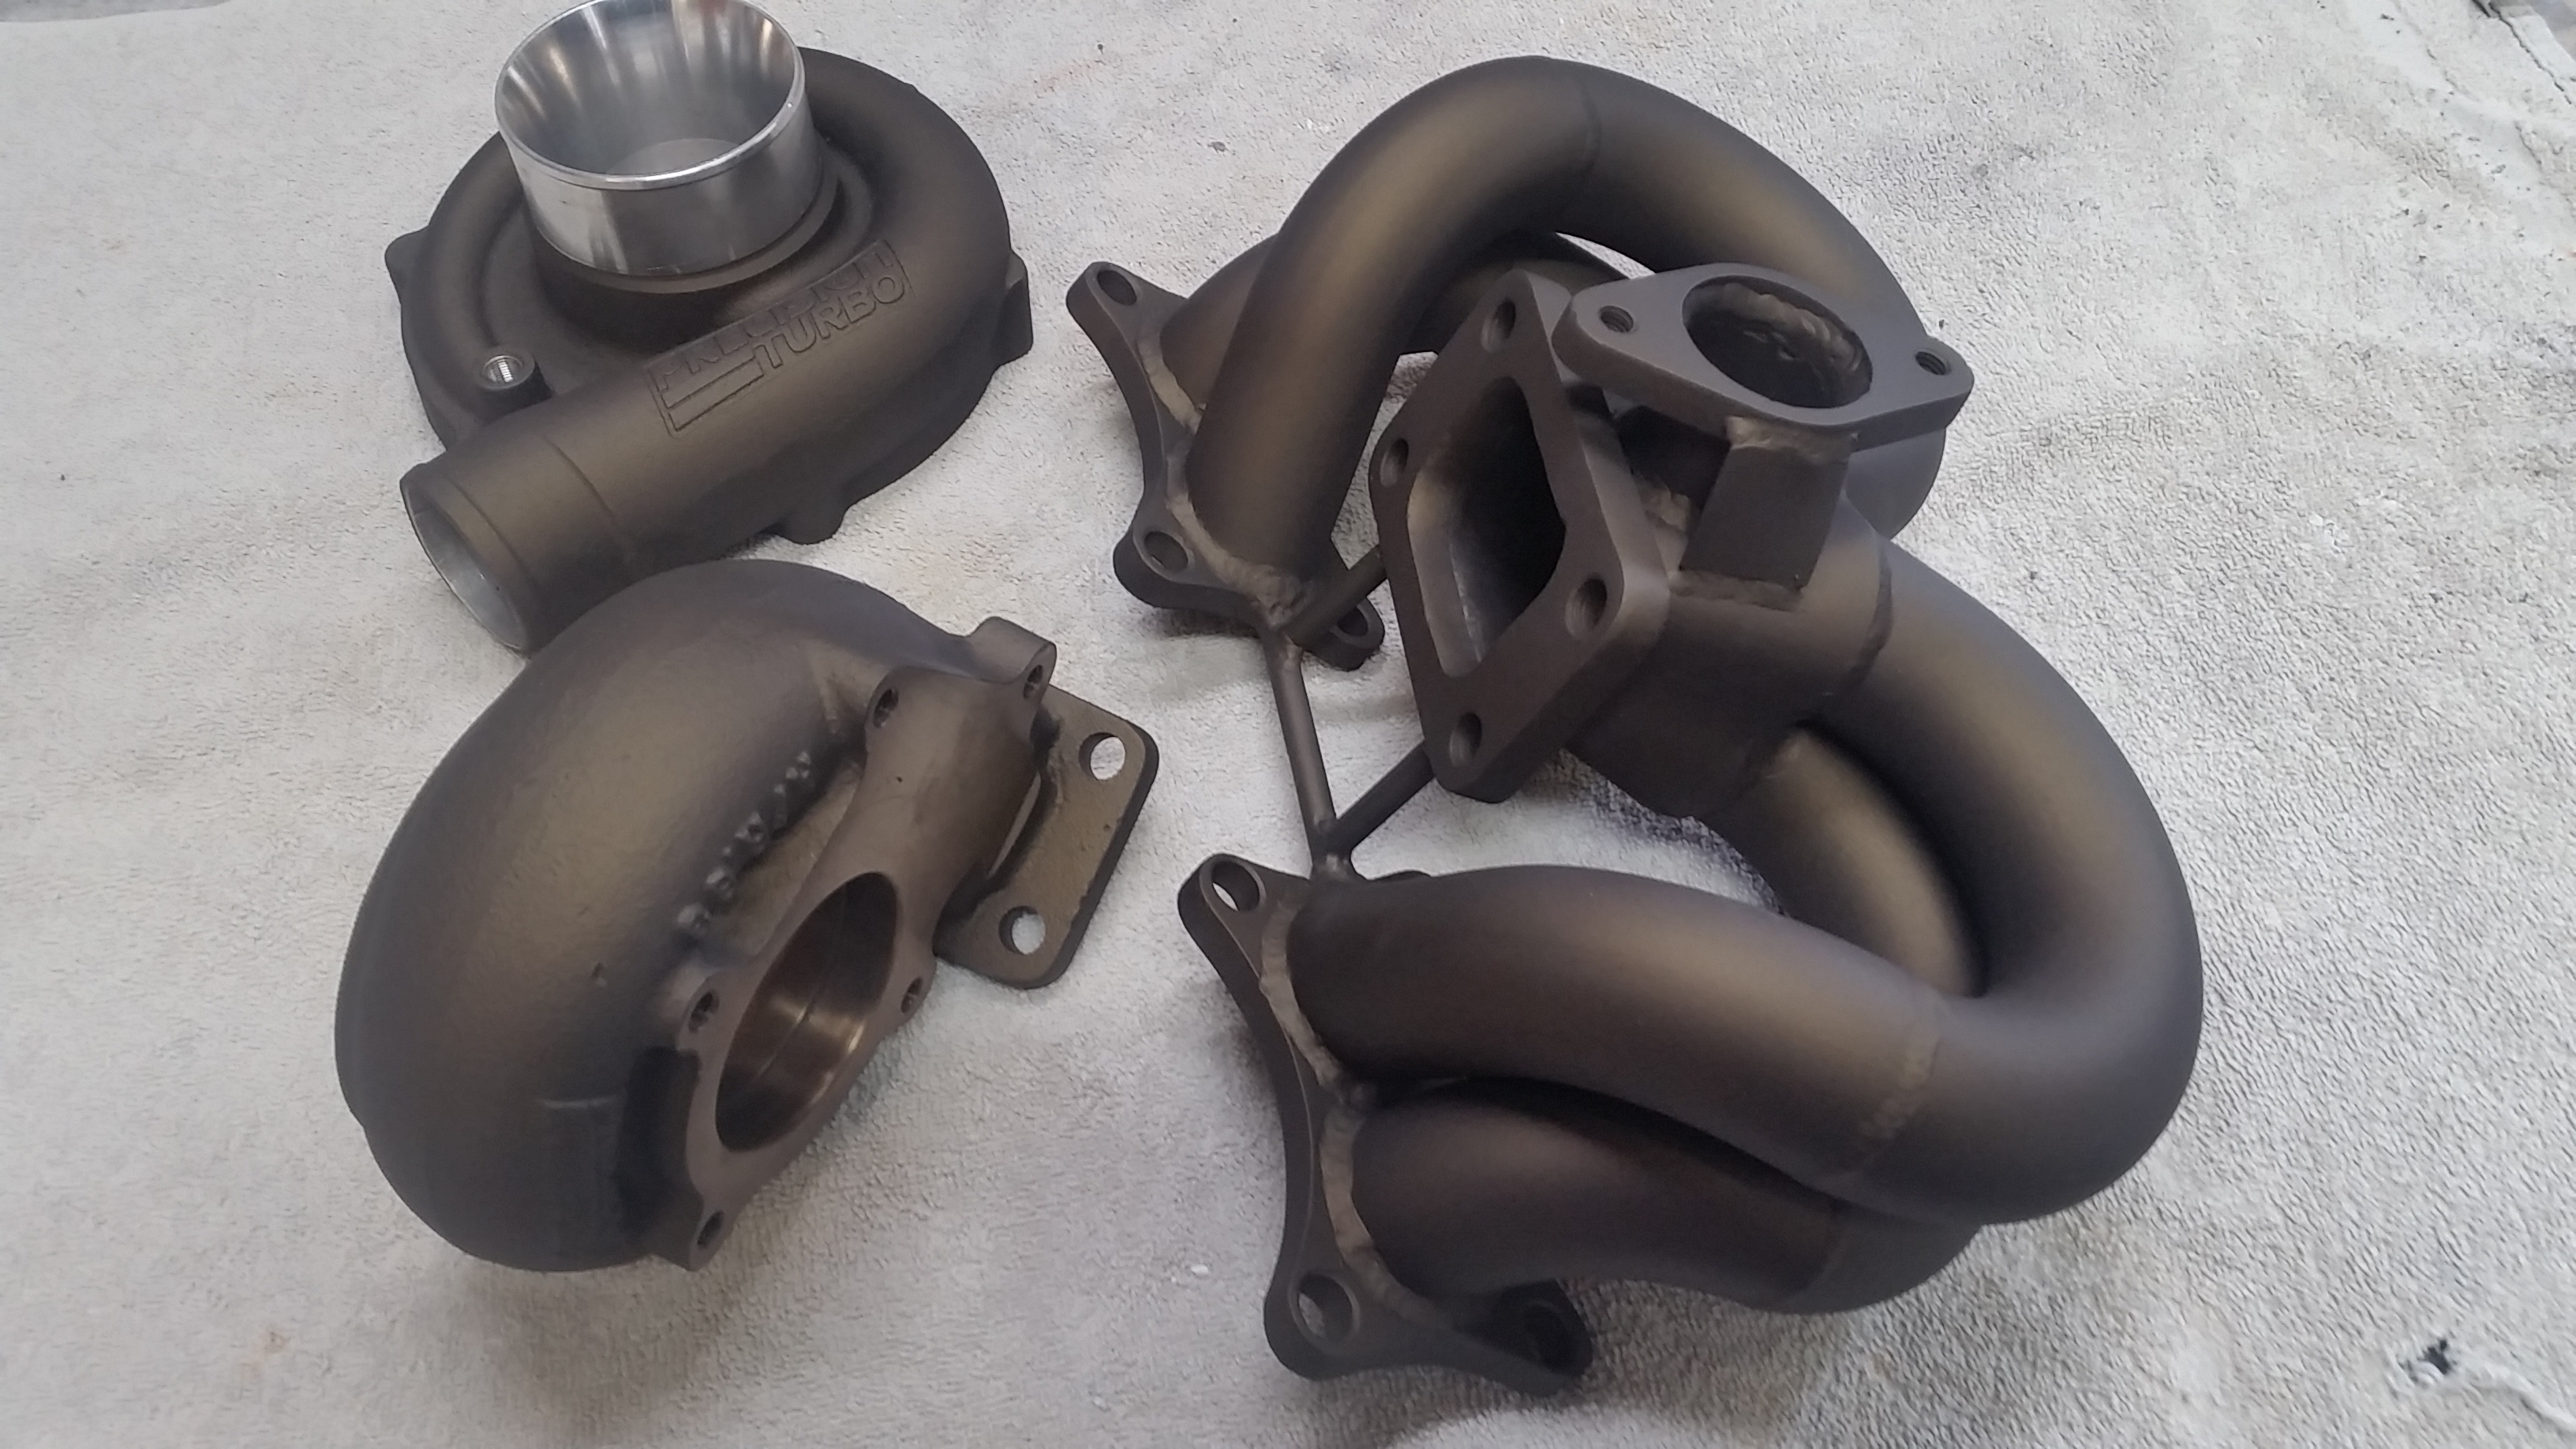 ZyBar coats turbos, headers, manifolds, exhaust and more!